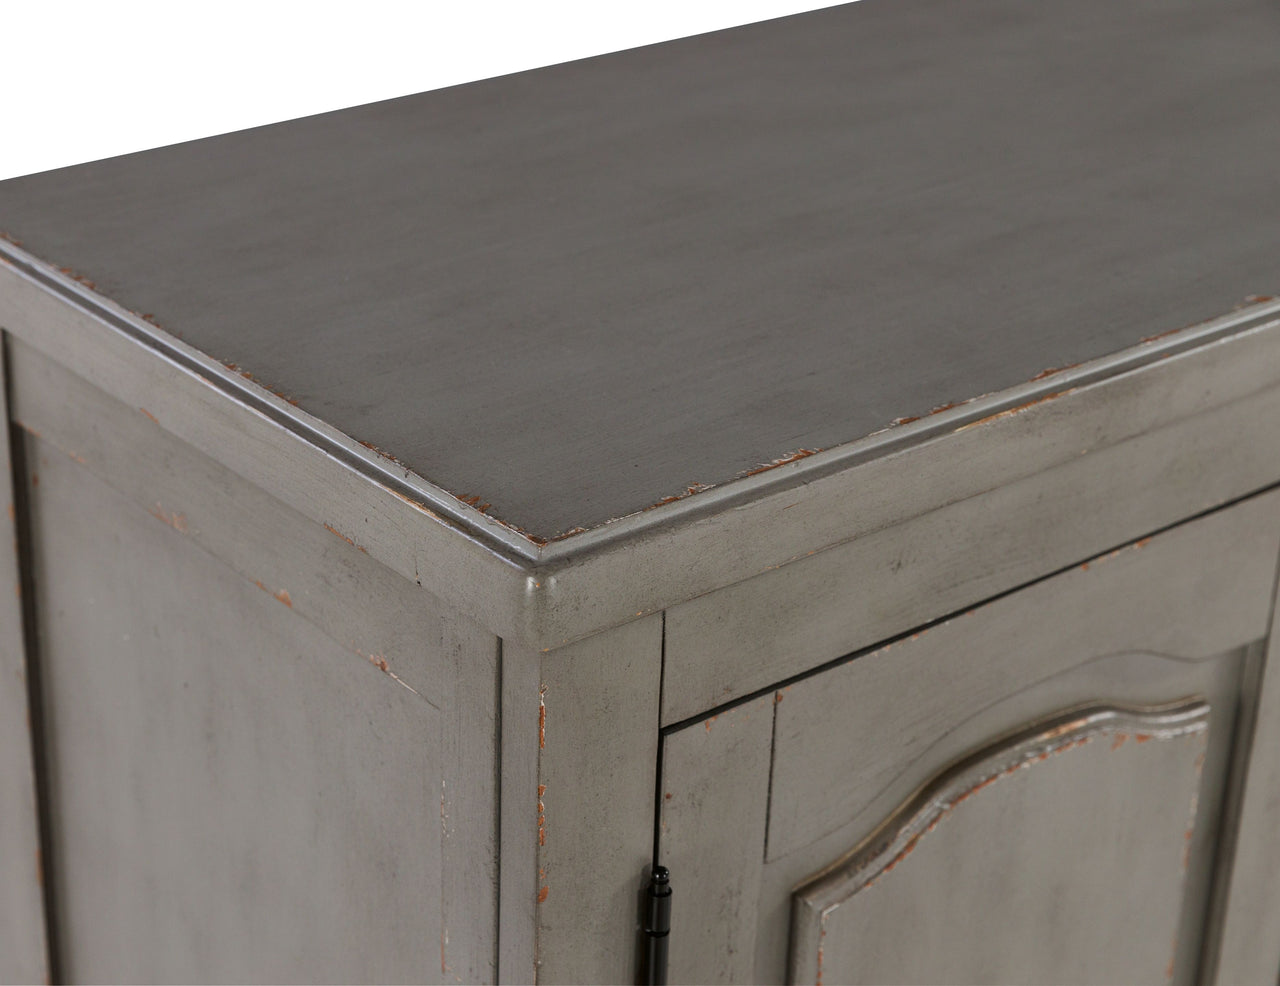 Charina - Antique Gray - Accent Cabinet - Tony's Home Furnishings